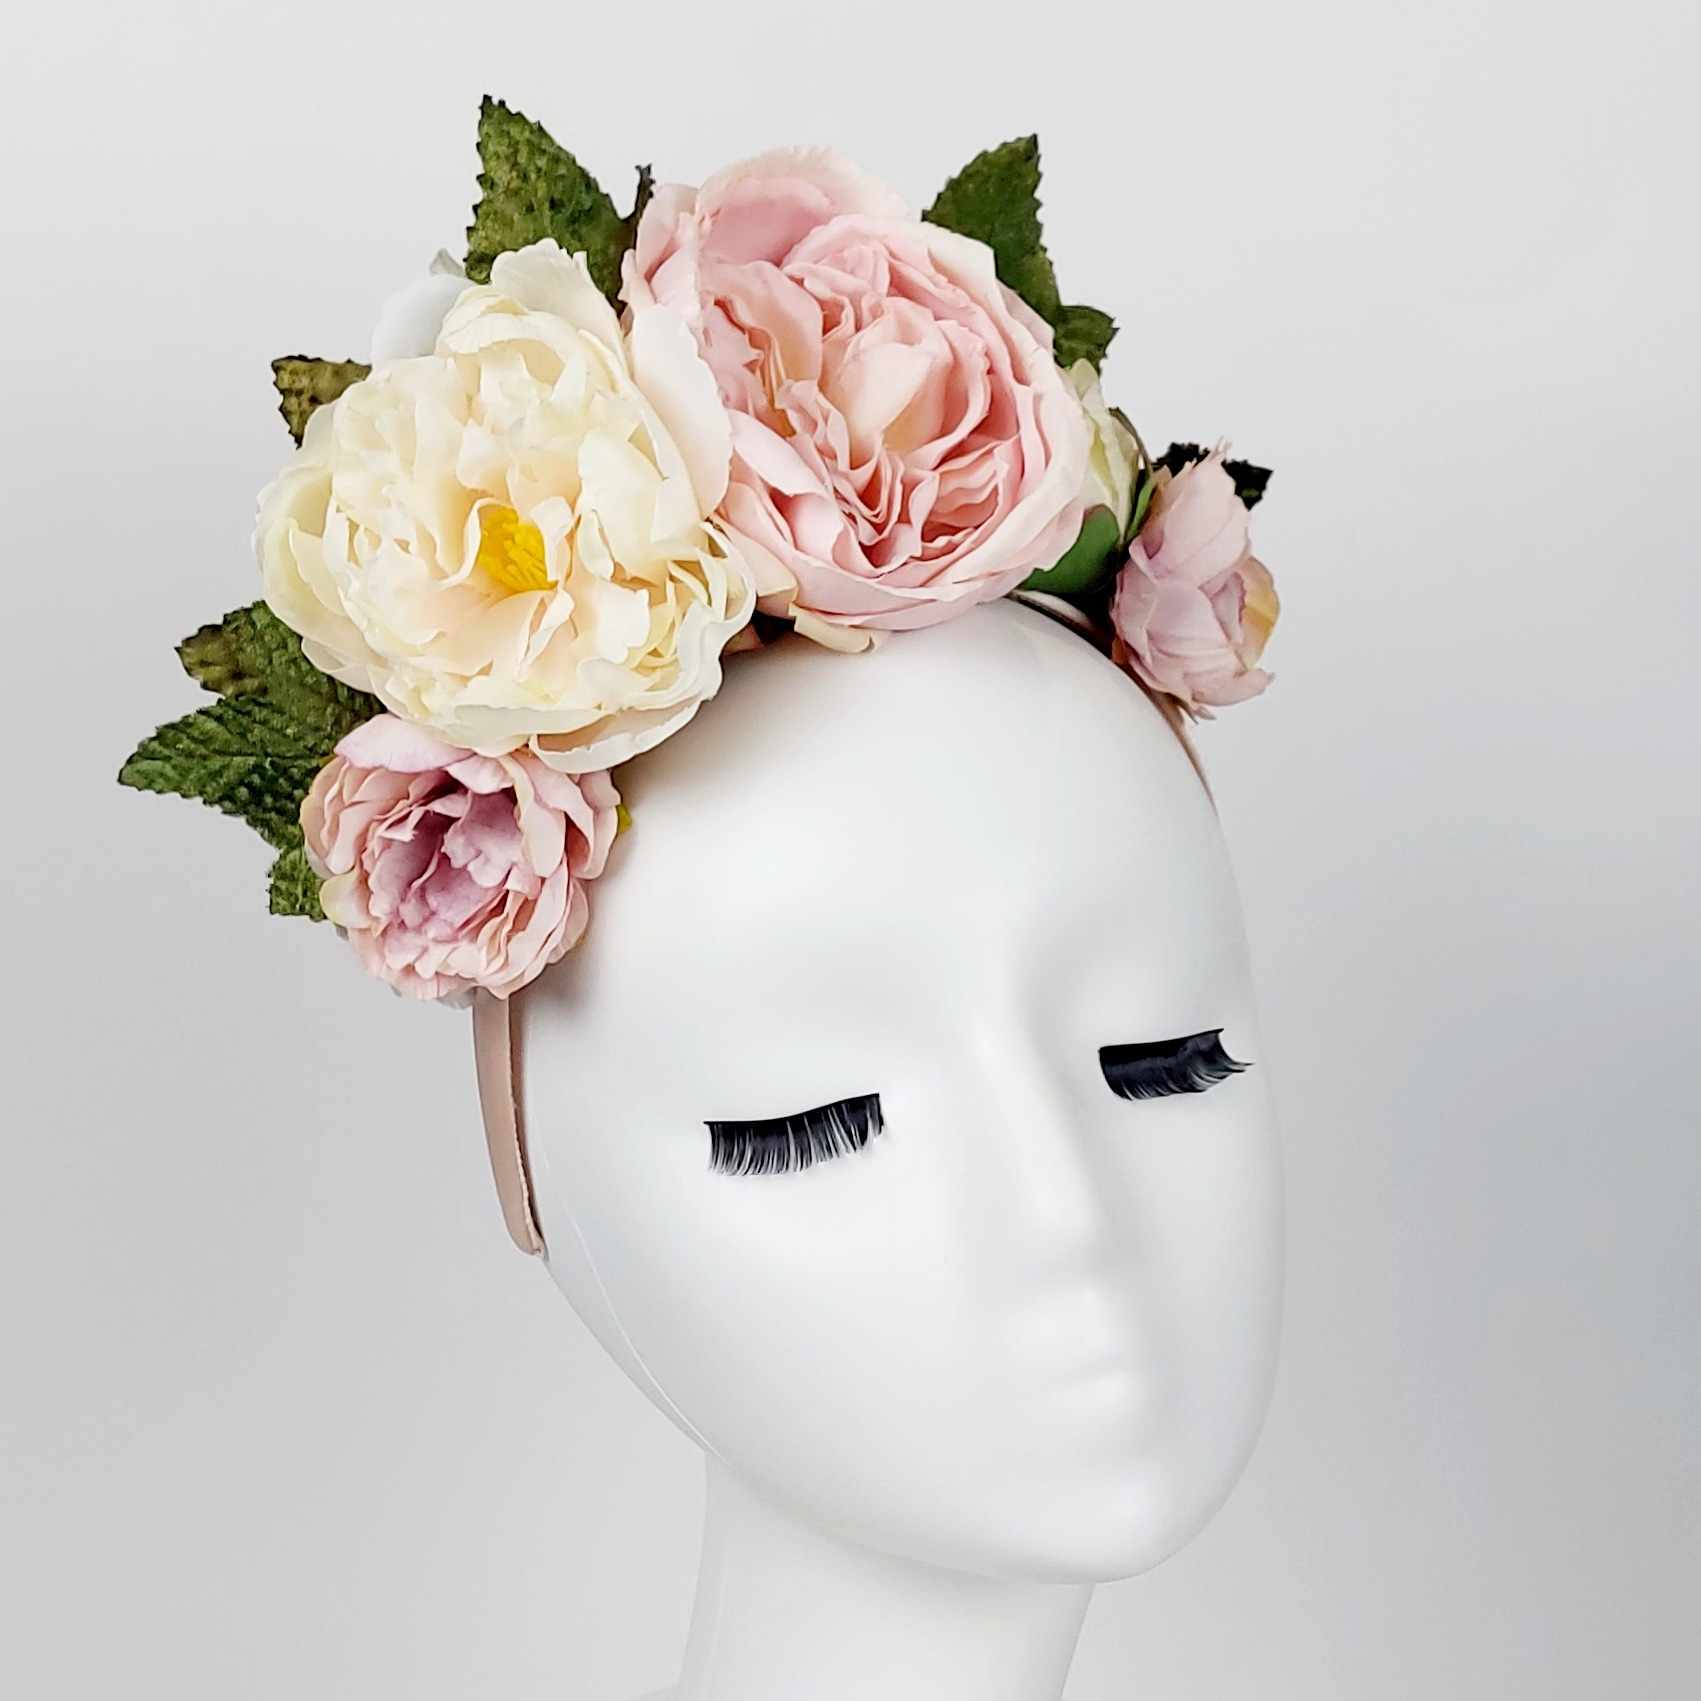 blush pink flower crown to wear to the races and weddings